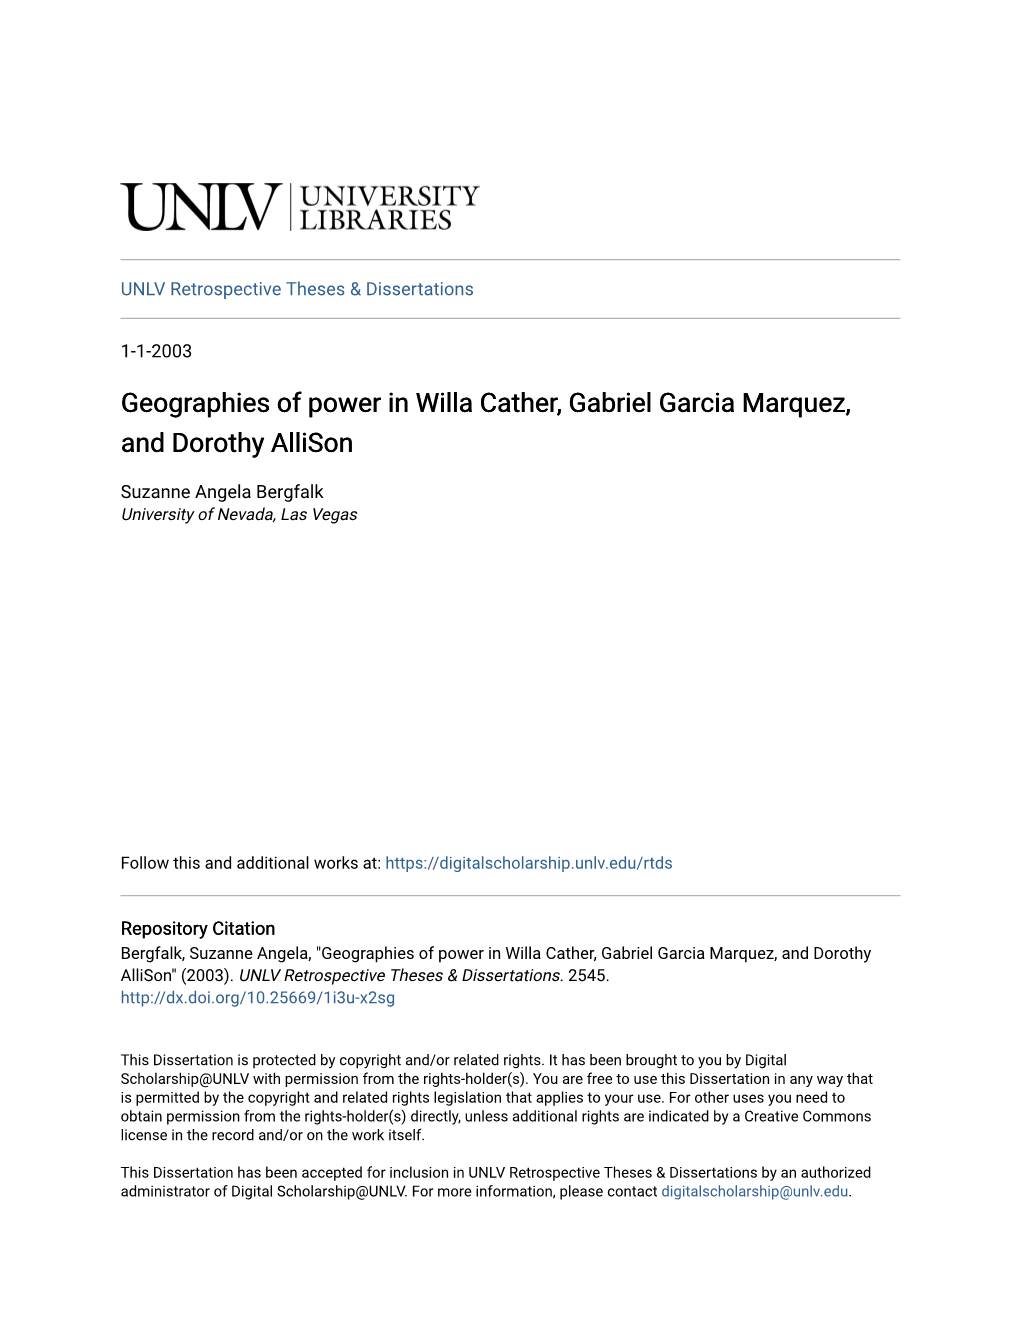 Geographies of Power in Willa Cather, Gabriel Garcia Marquez, and Dorothy Allison